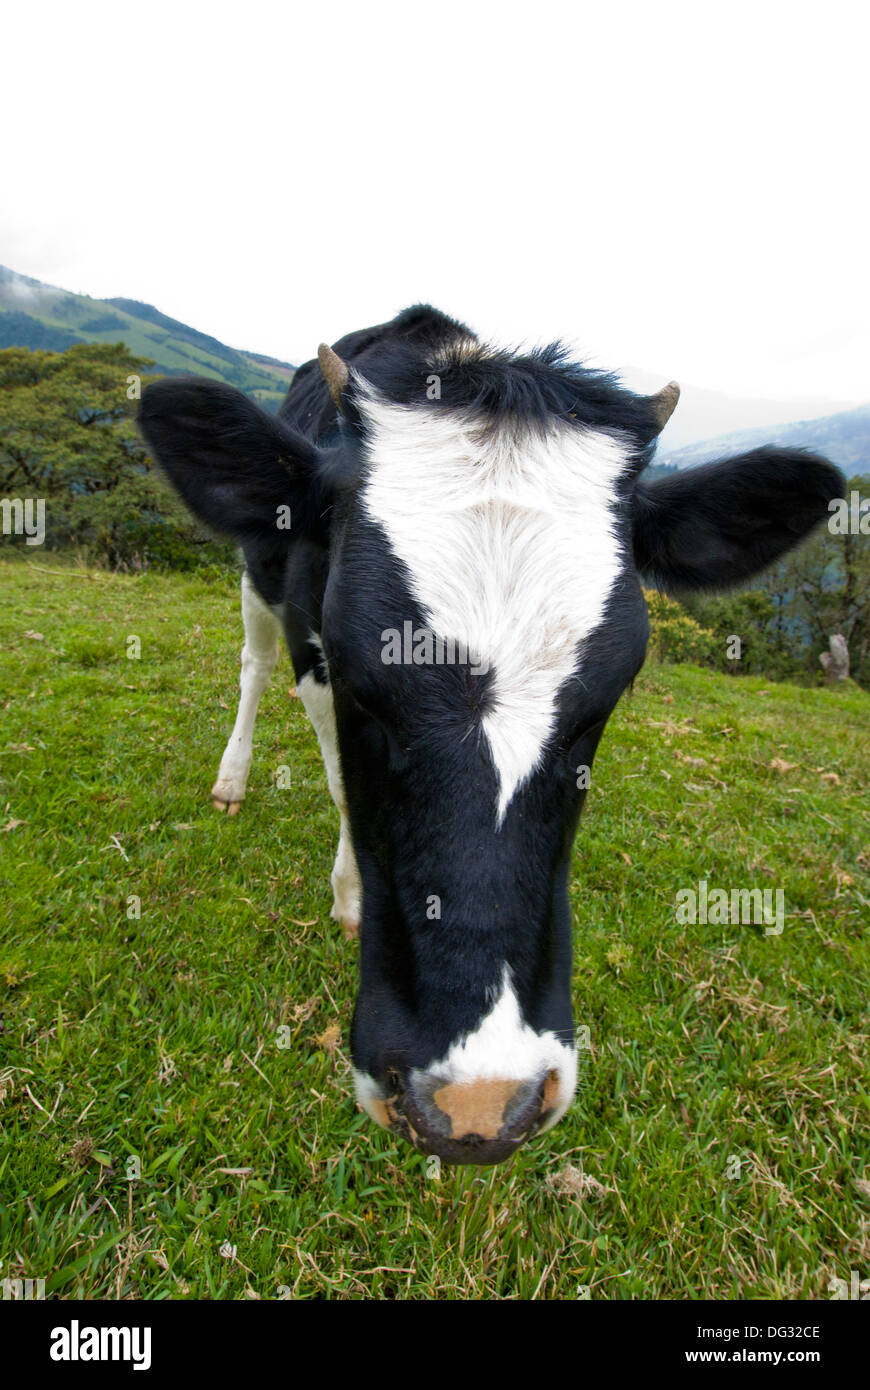 Holstein cow face Stock Photo